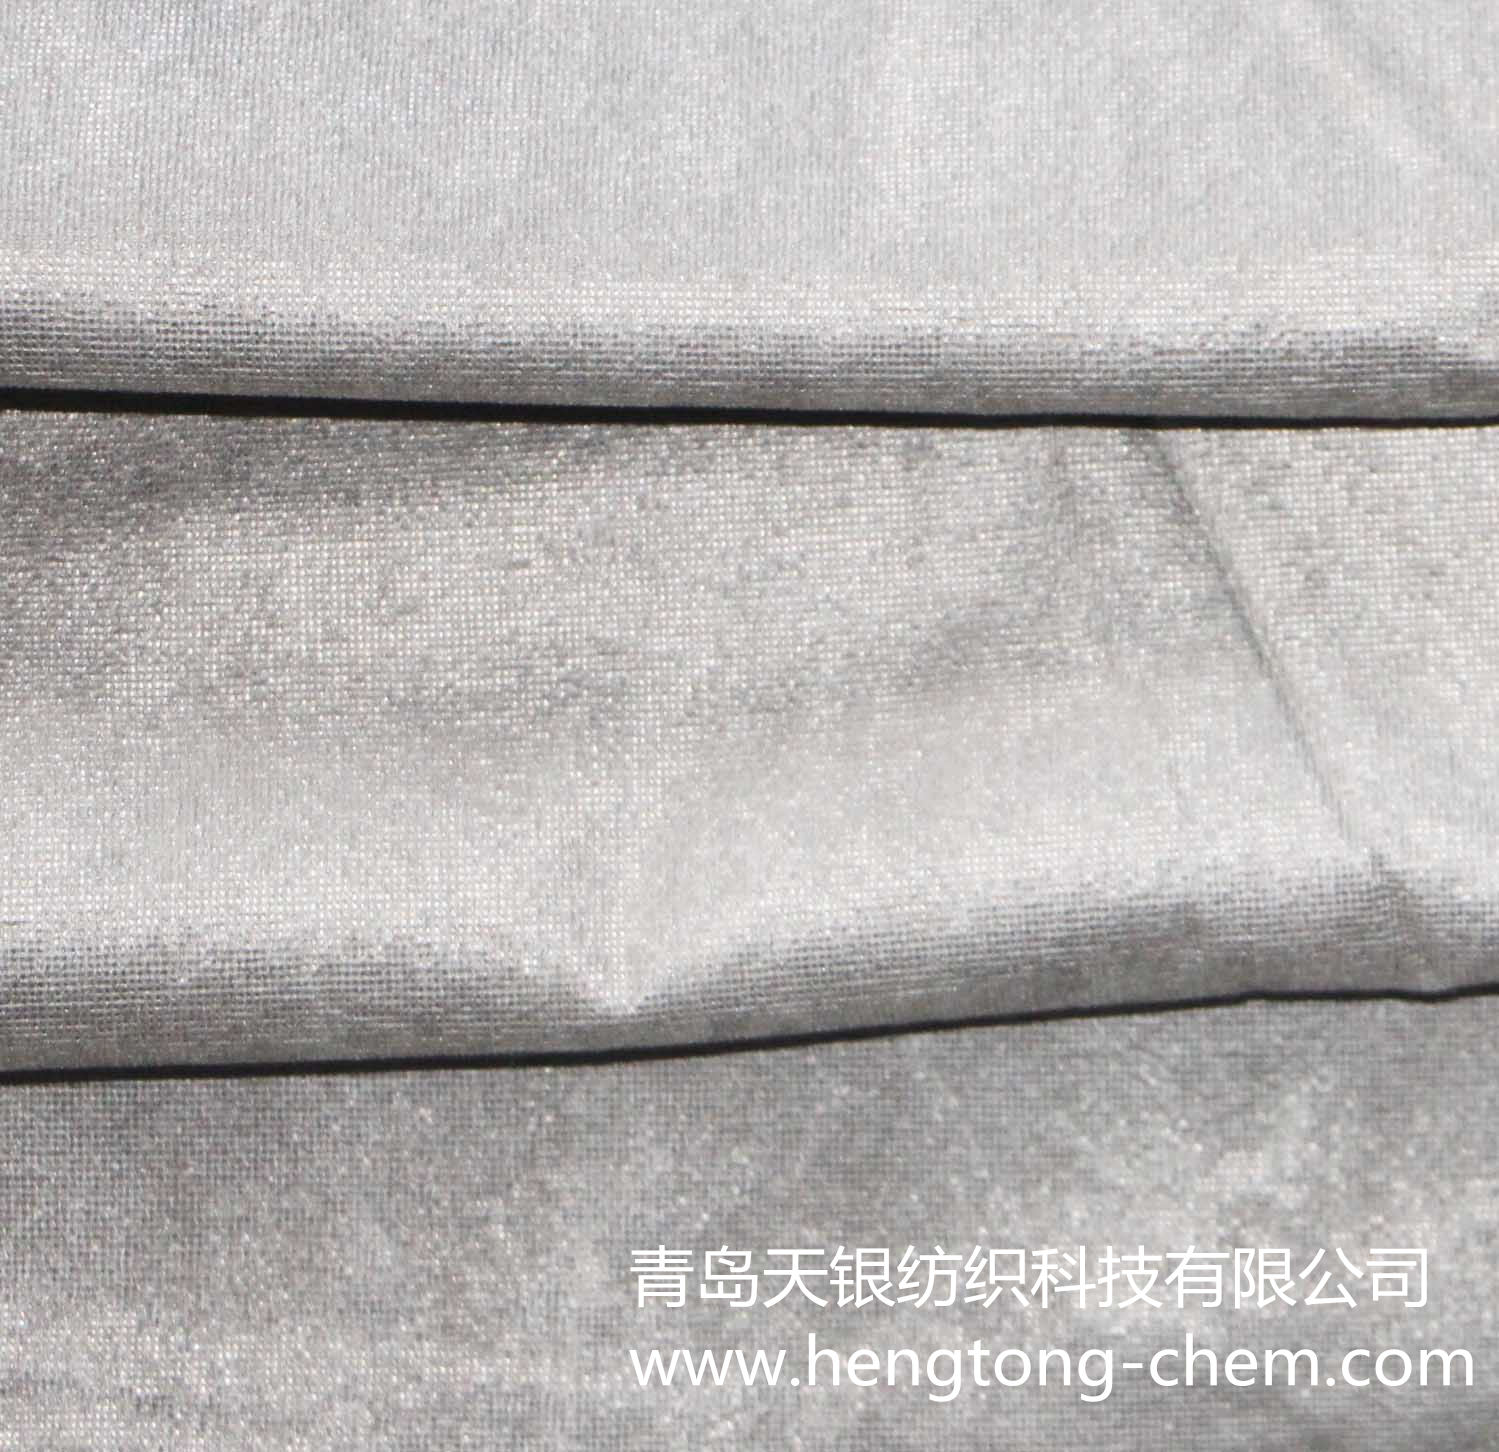 Antibacterial non-woven fabric for air filtration